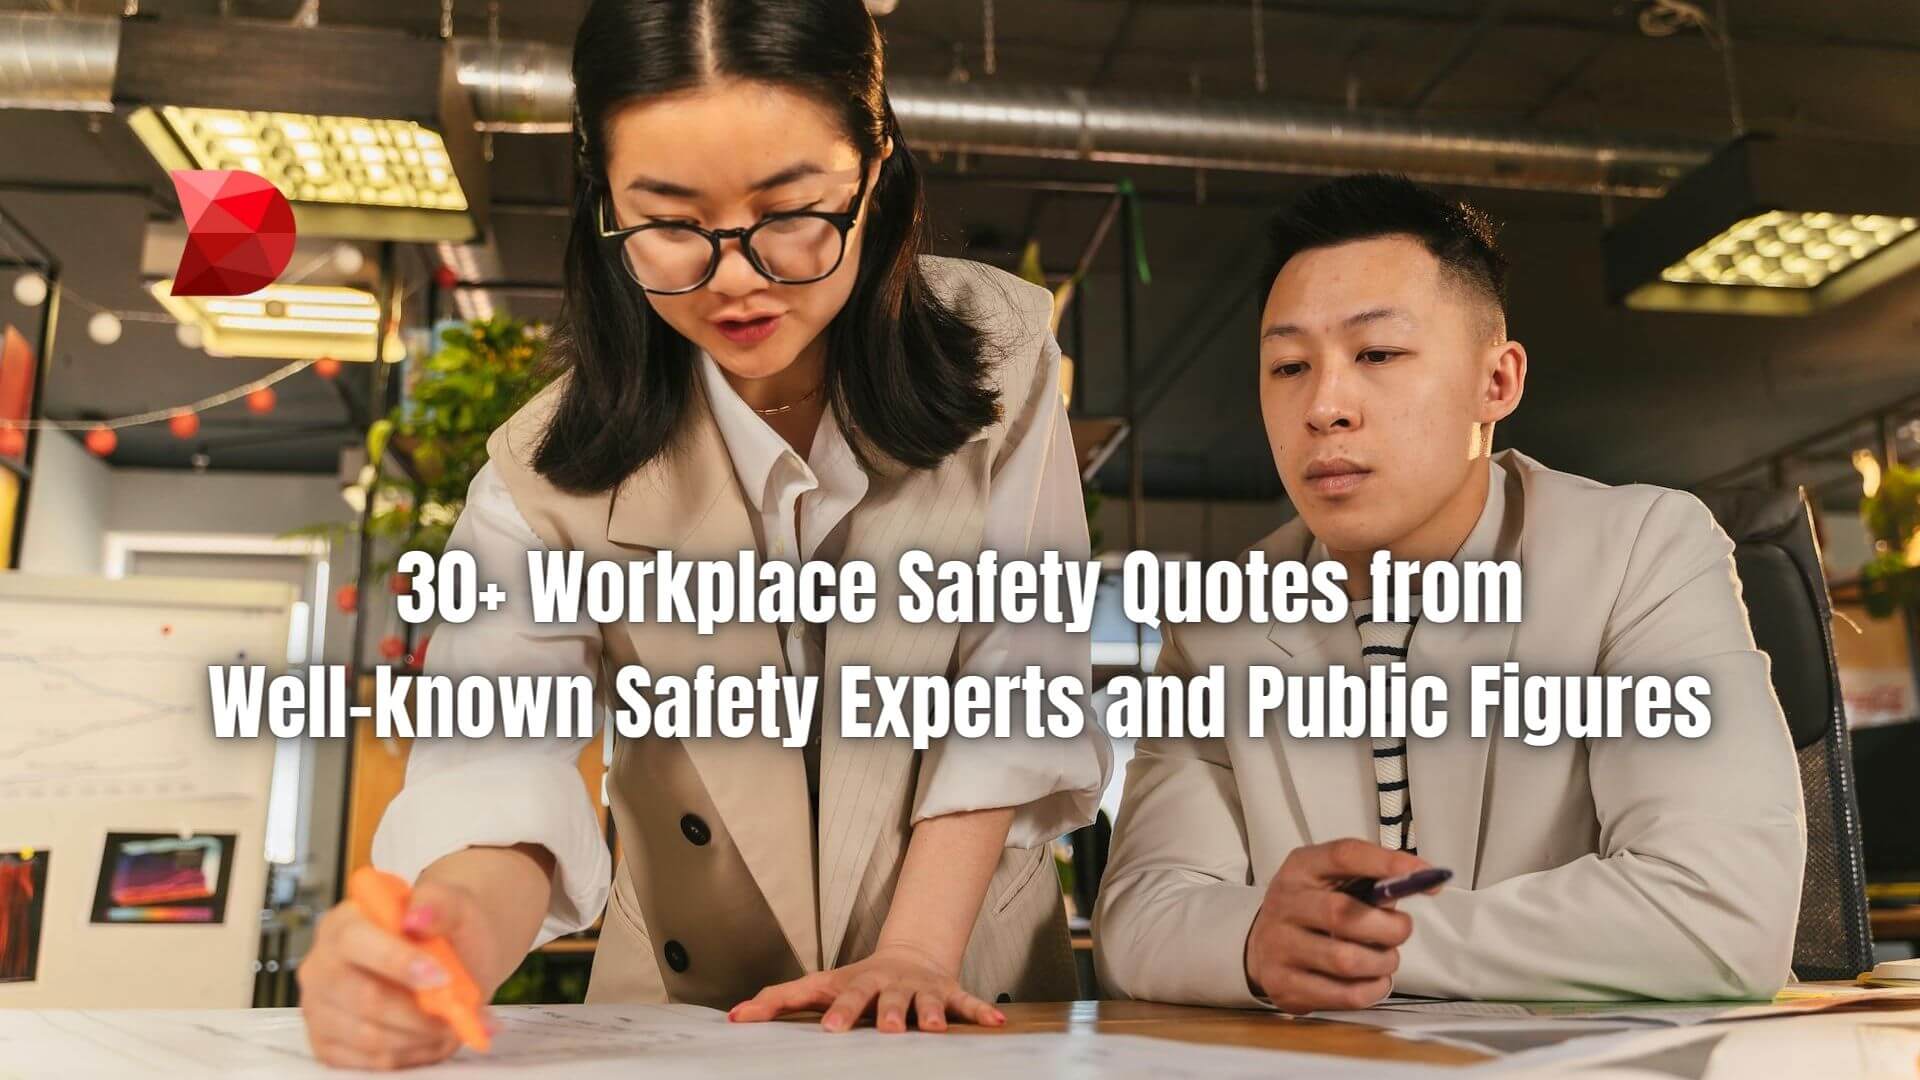 Inspire a safety-first mindset with this guide to 30+ workplace safety quotes. Learn from experts for a secure and productive workplace.